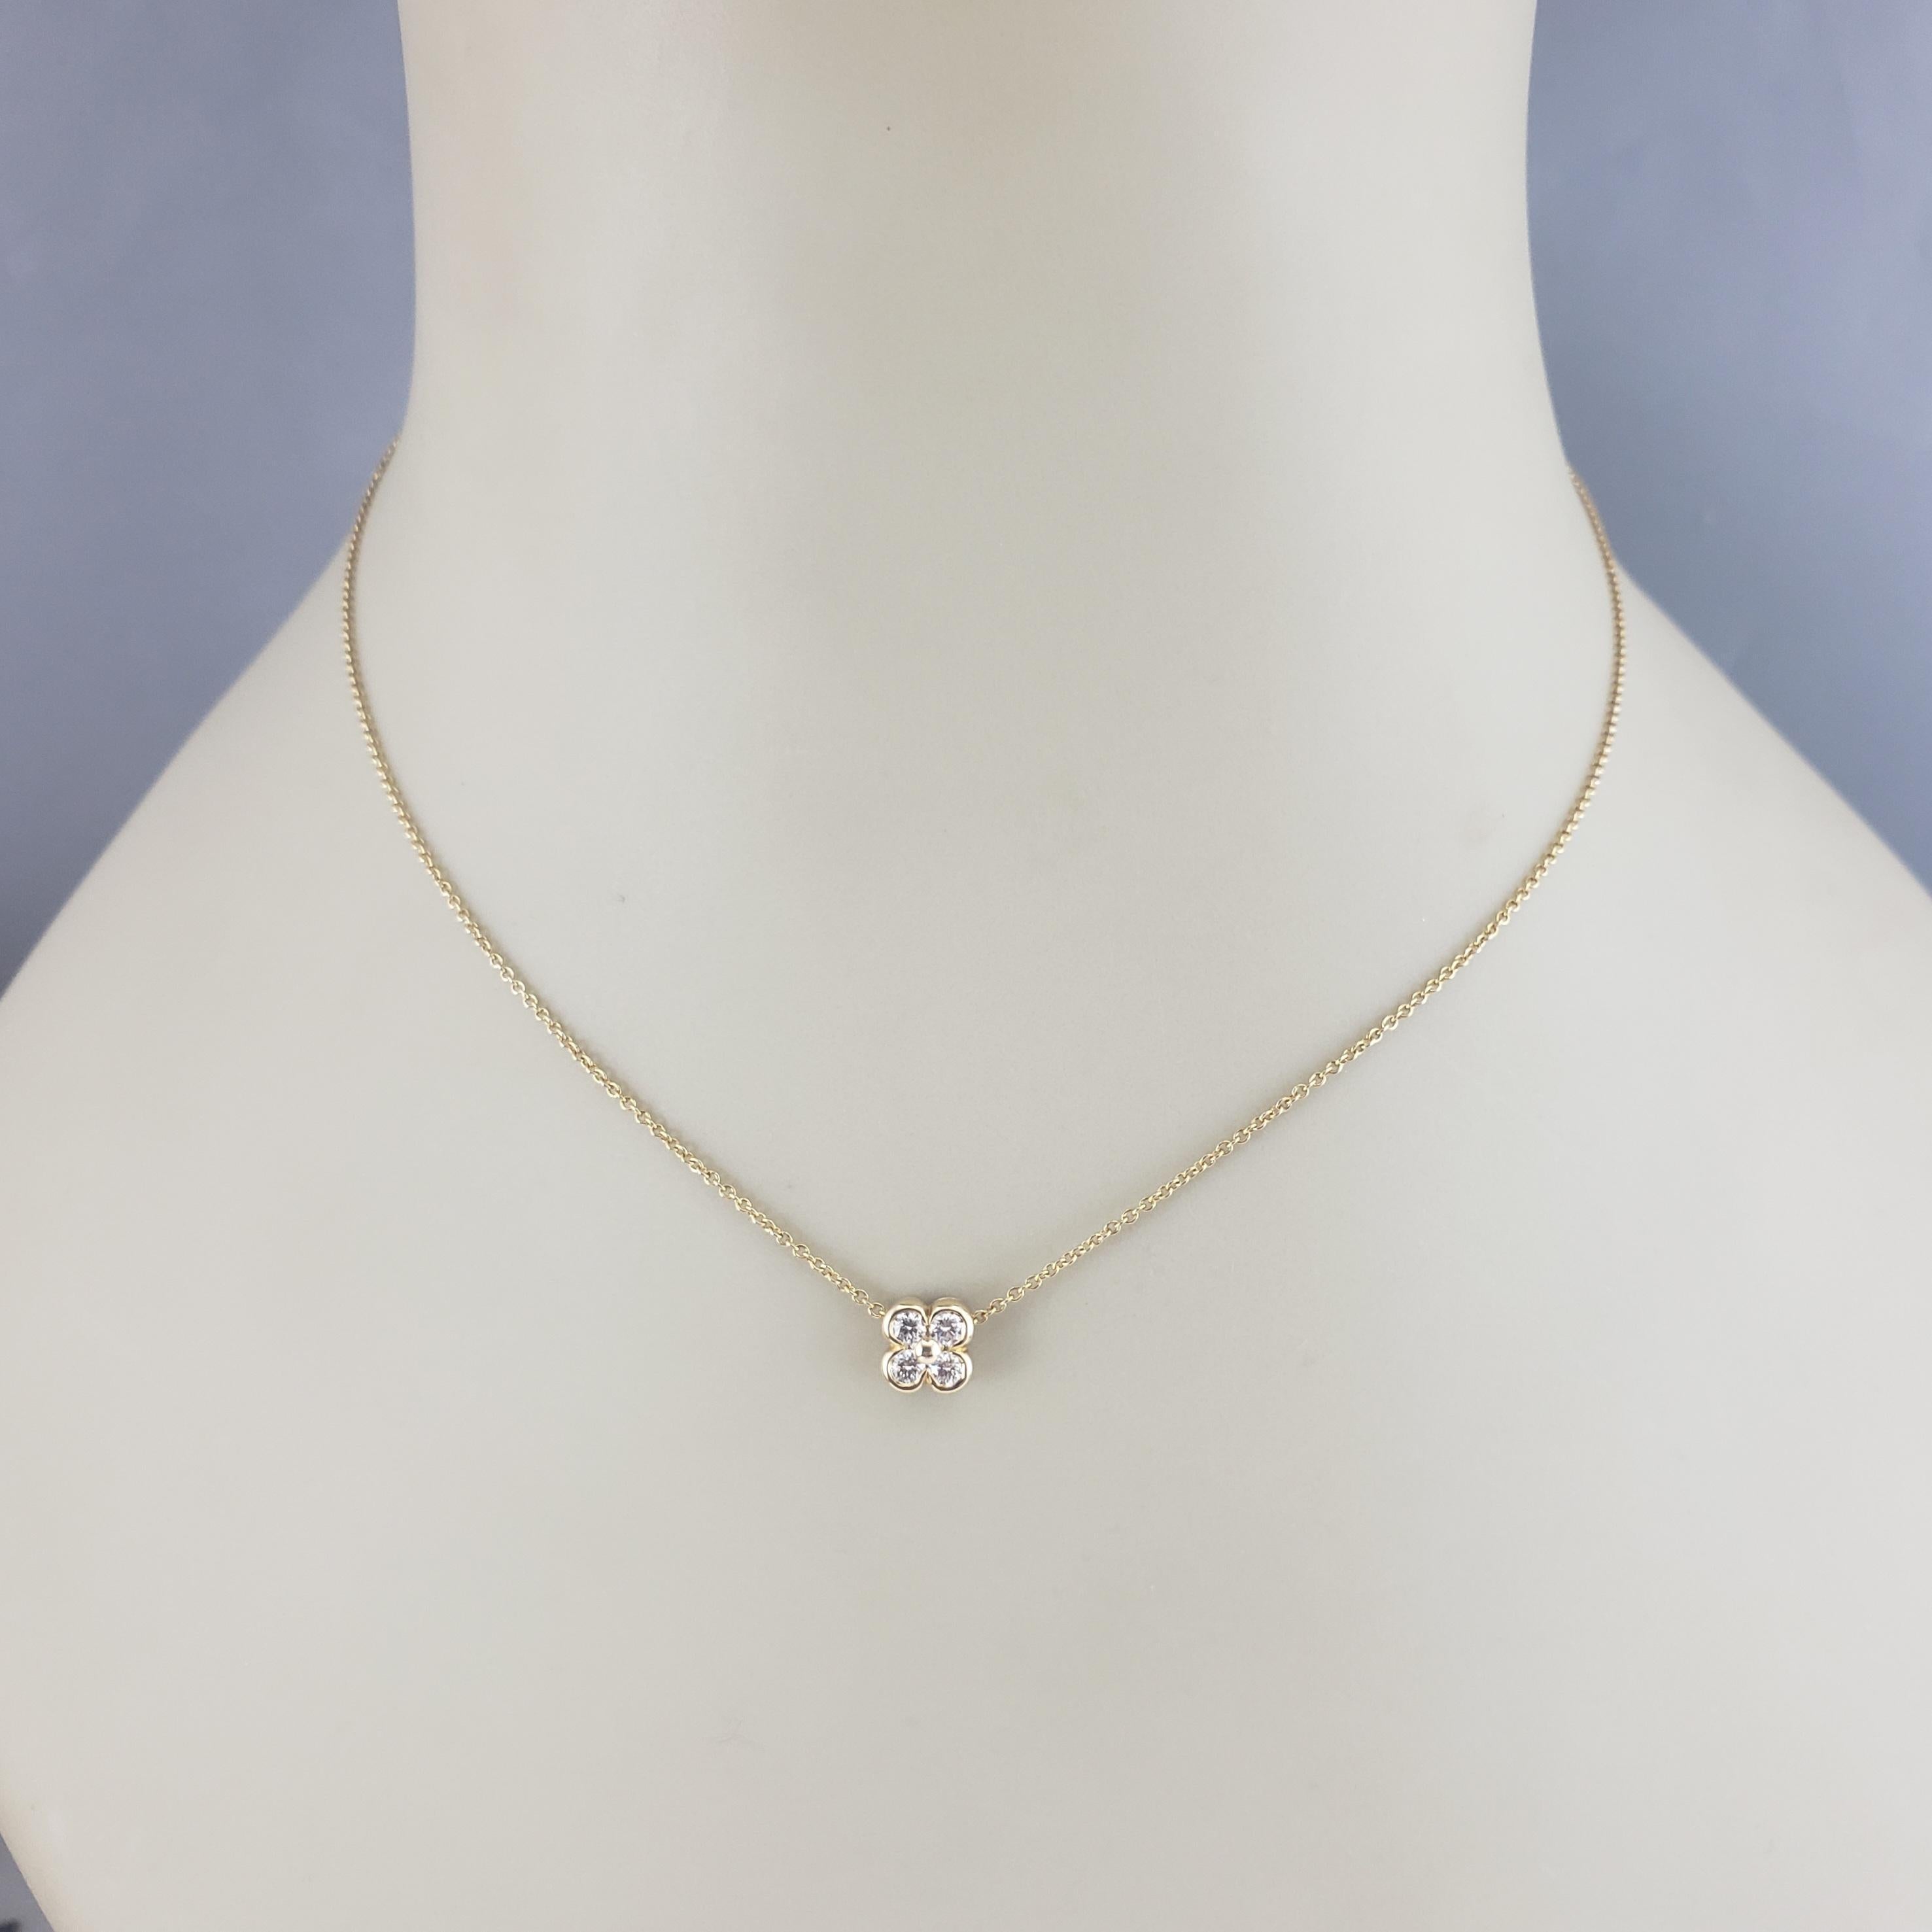 Tiffany & Co. 18 Karat Yellow Gold Diamond Flower Clover Necklace #16837 For Sale 1